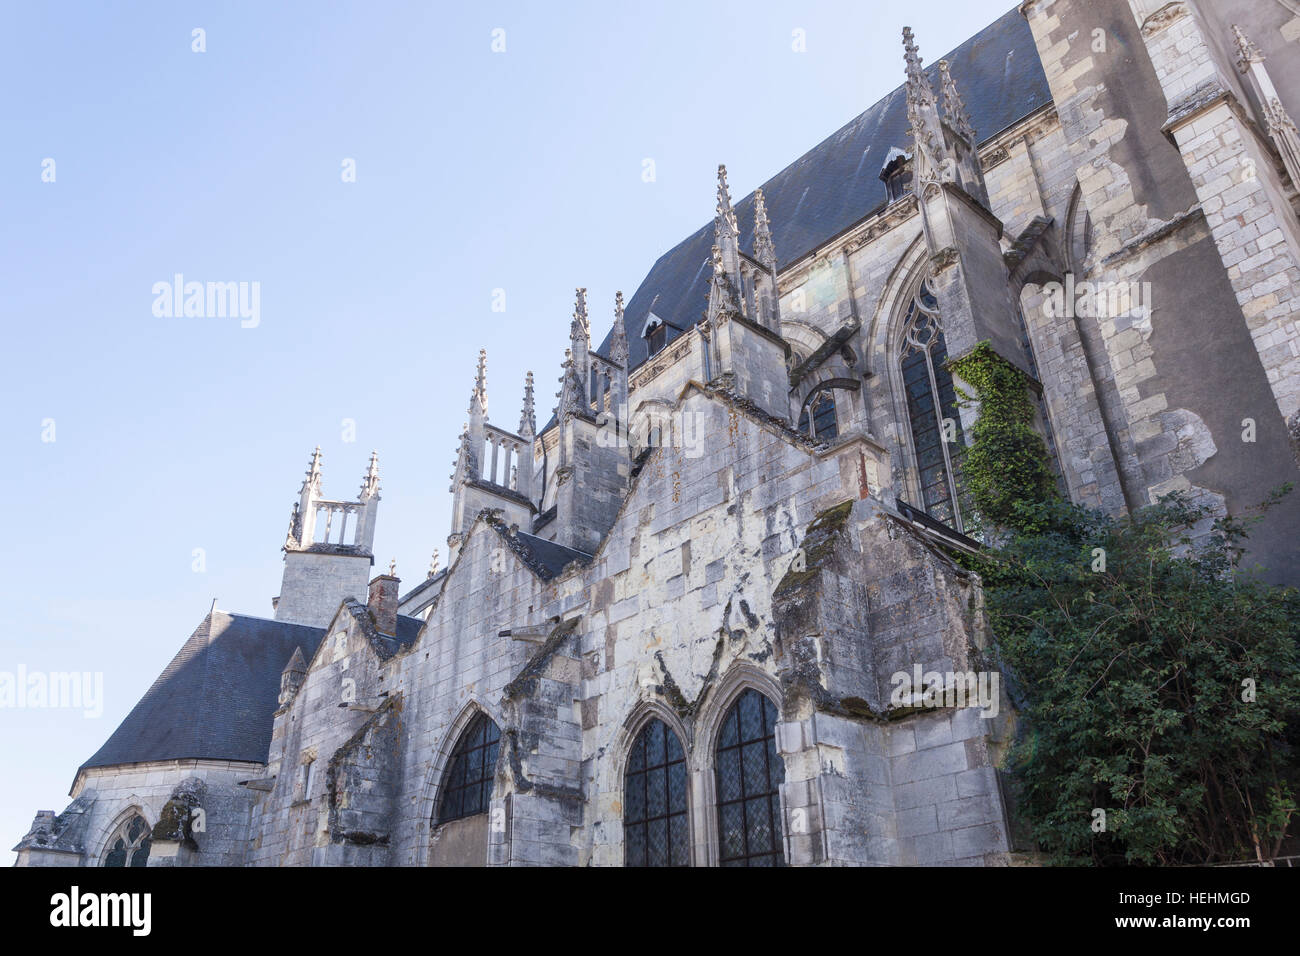 The collegiale of Saint Aignan in Orleans, France. Stock Photo